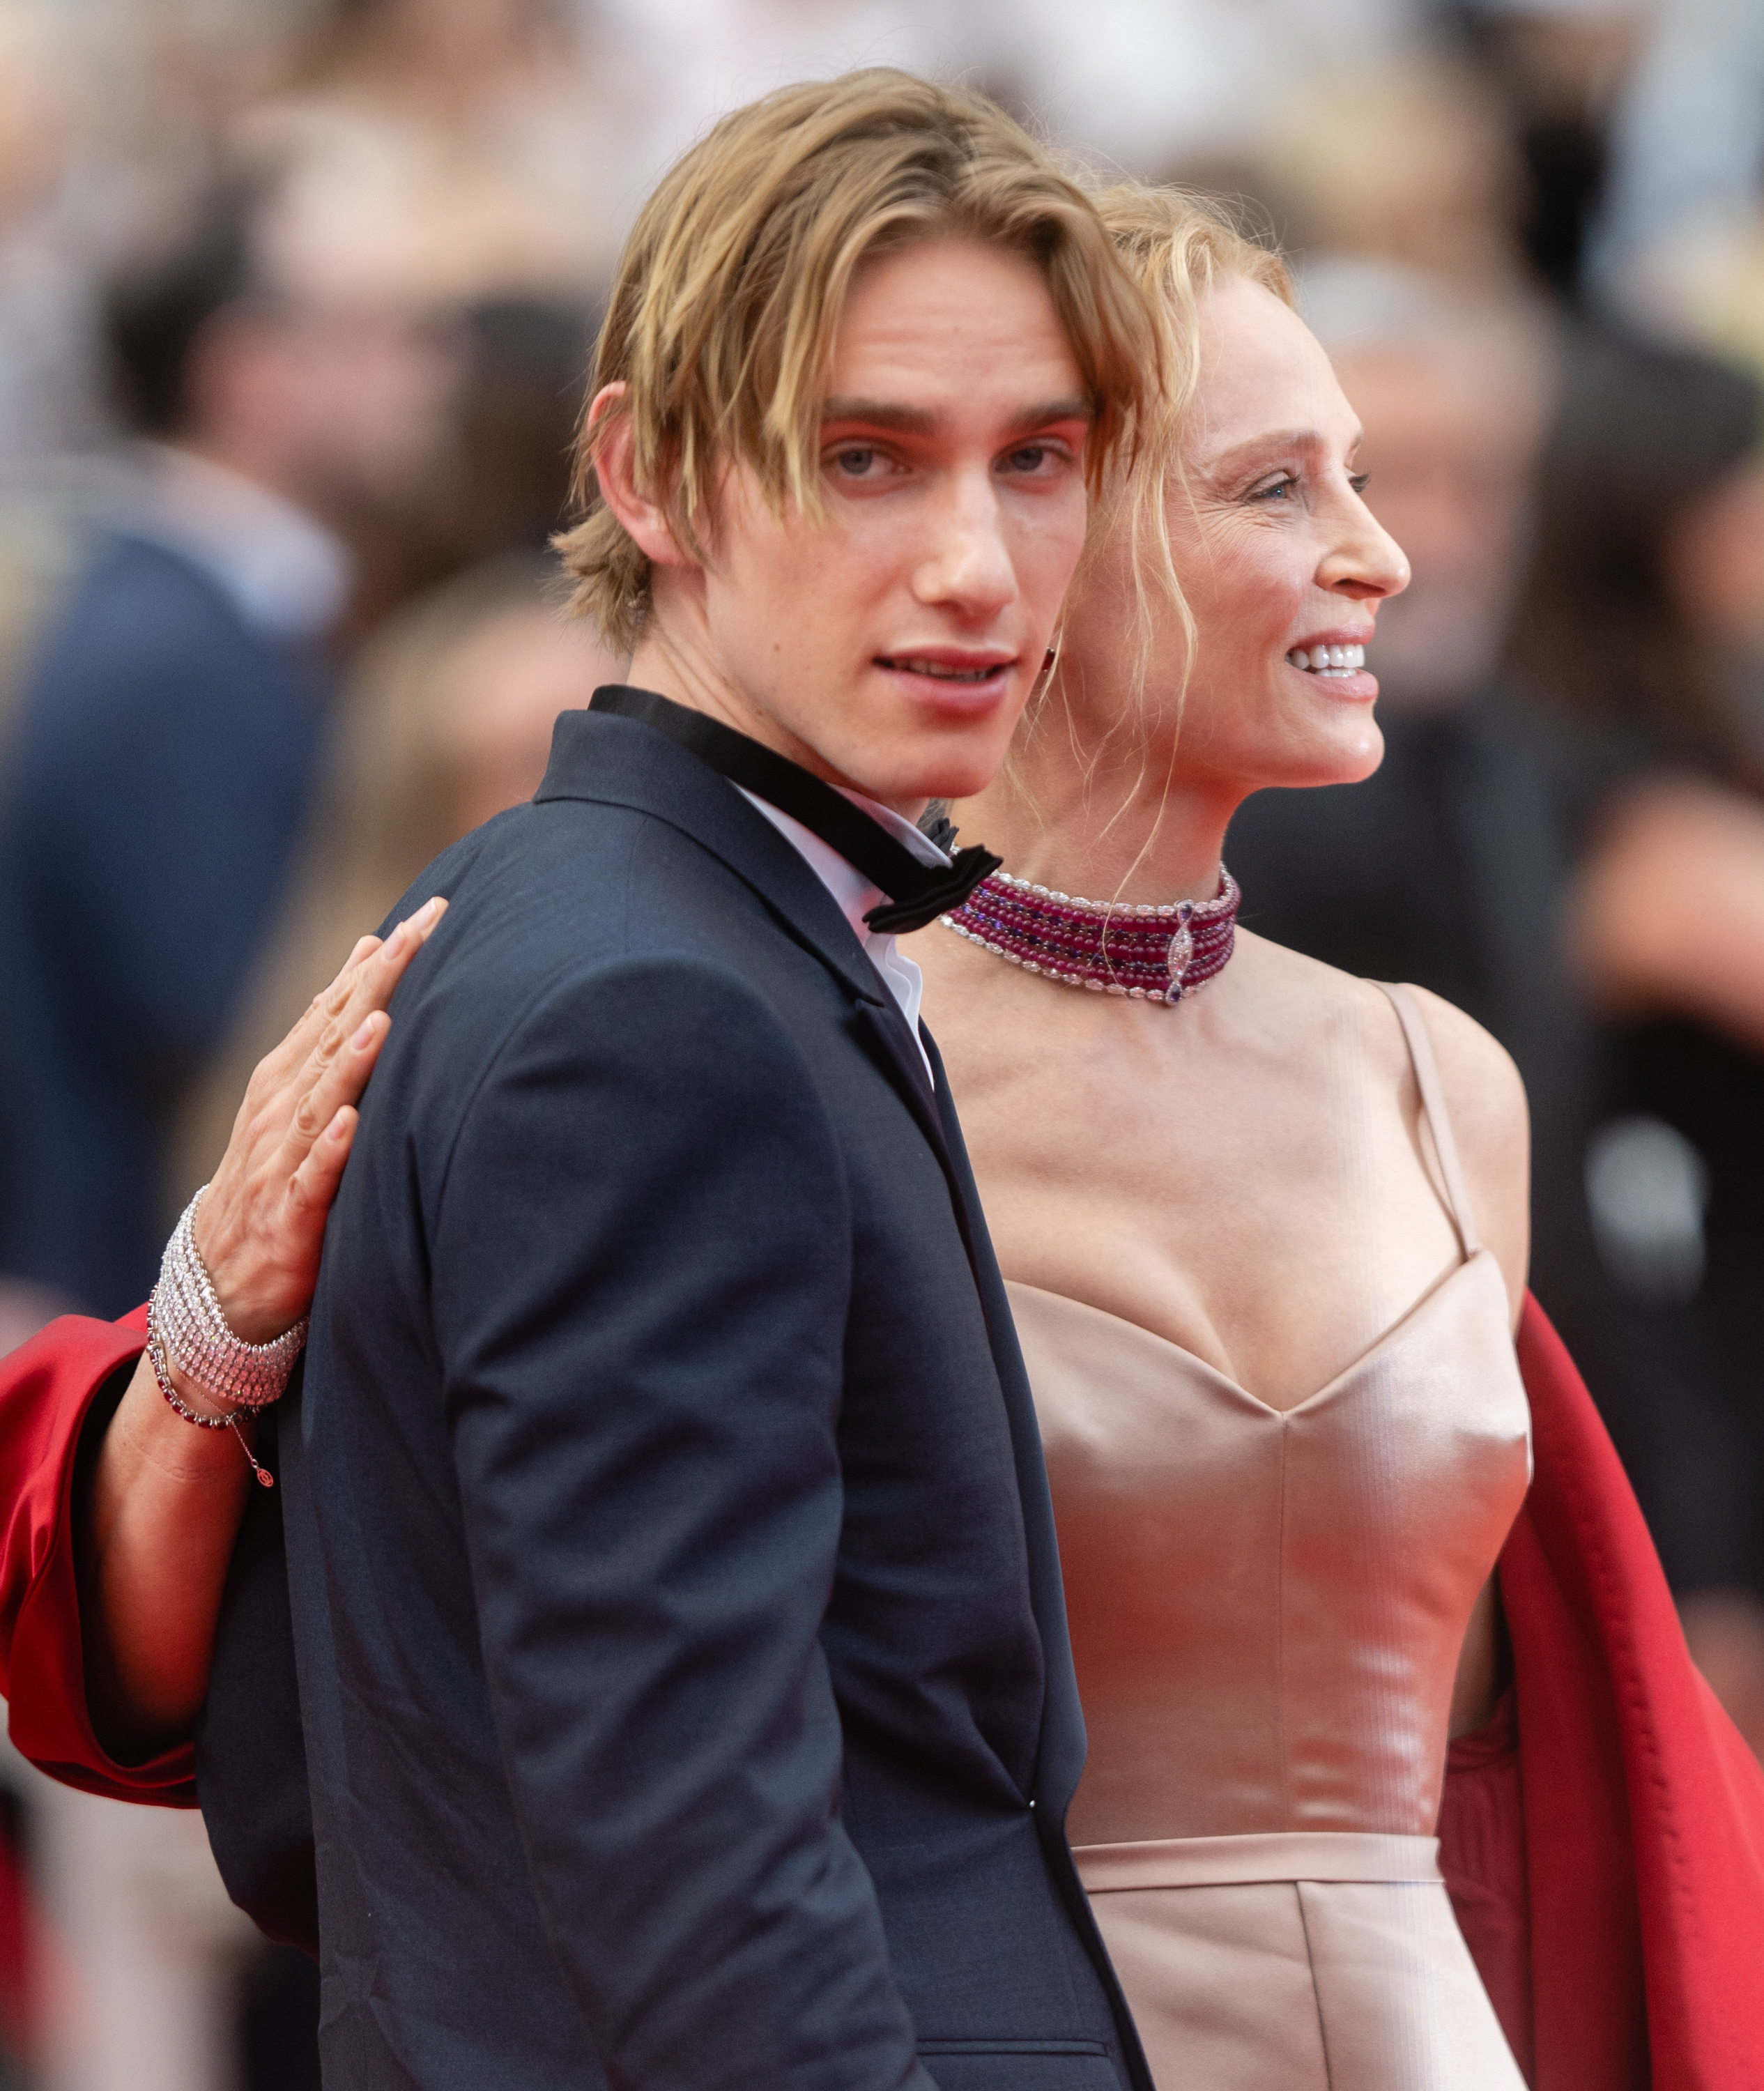 Levon Roan Thurman-Hawke and Uma Thurman at the "Jeanne du Barry" screening and opening ceremony red carpet at the 76th annual Cannes Film Festival on May 16, 2023, in Cannes, France | Source: Getty Images